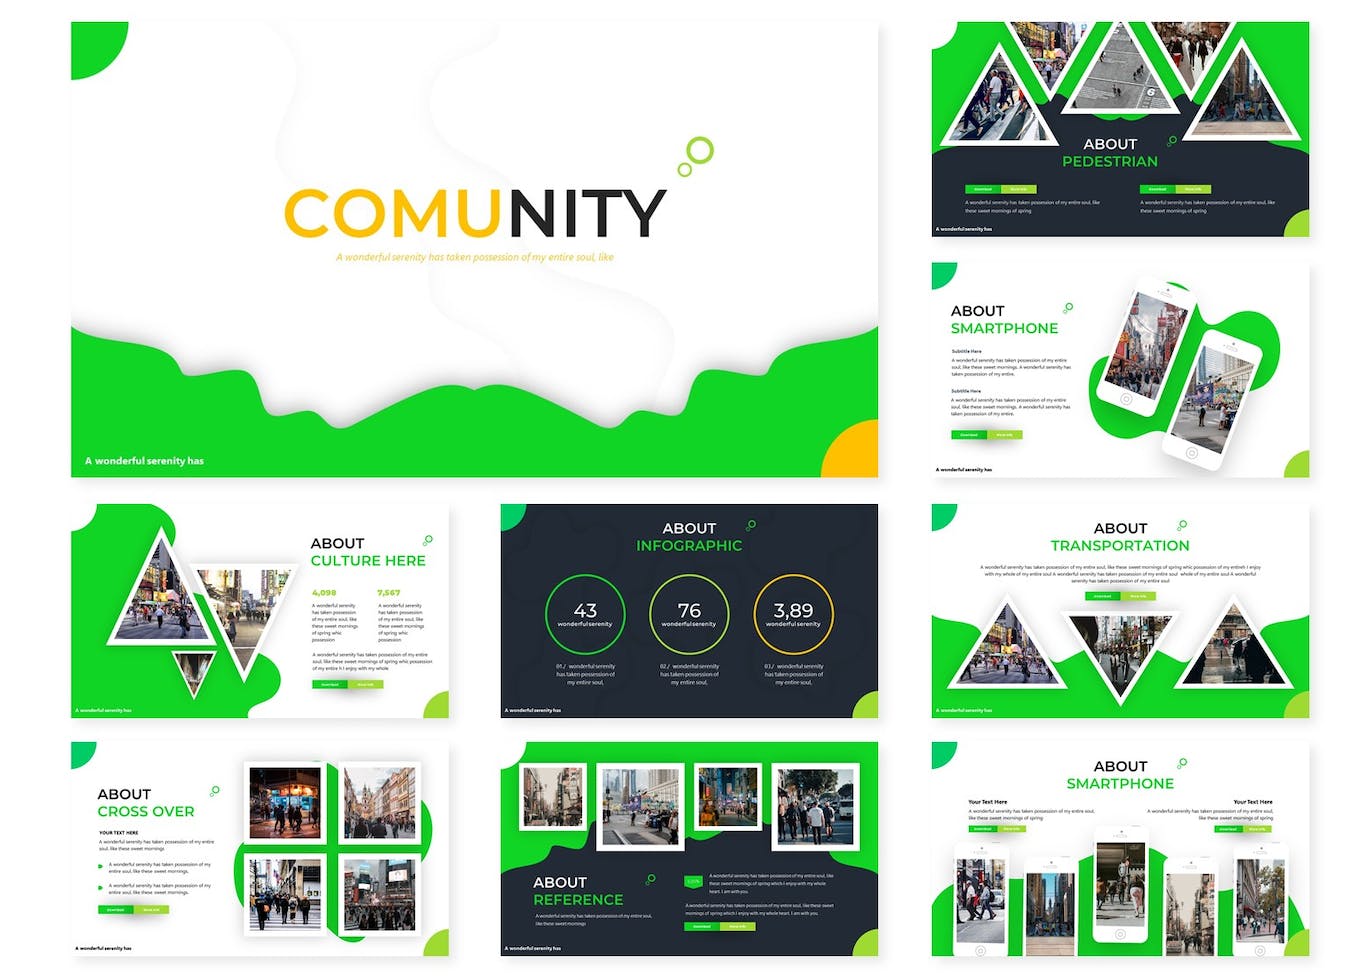 A collection of images of adorable community-themed slide presentation template.